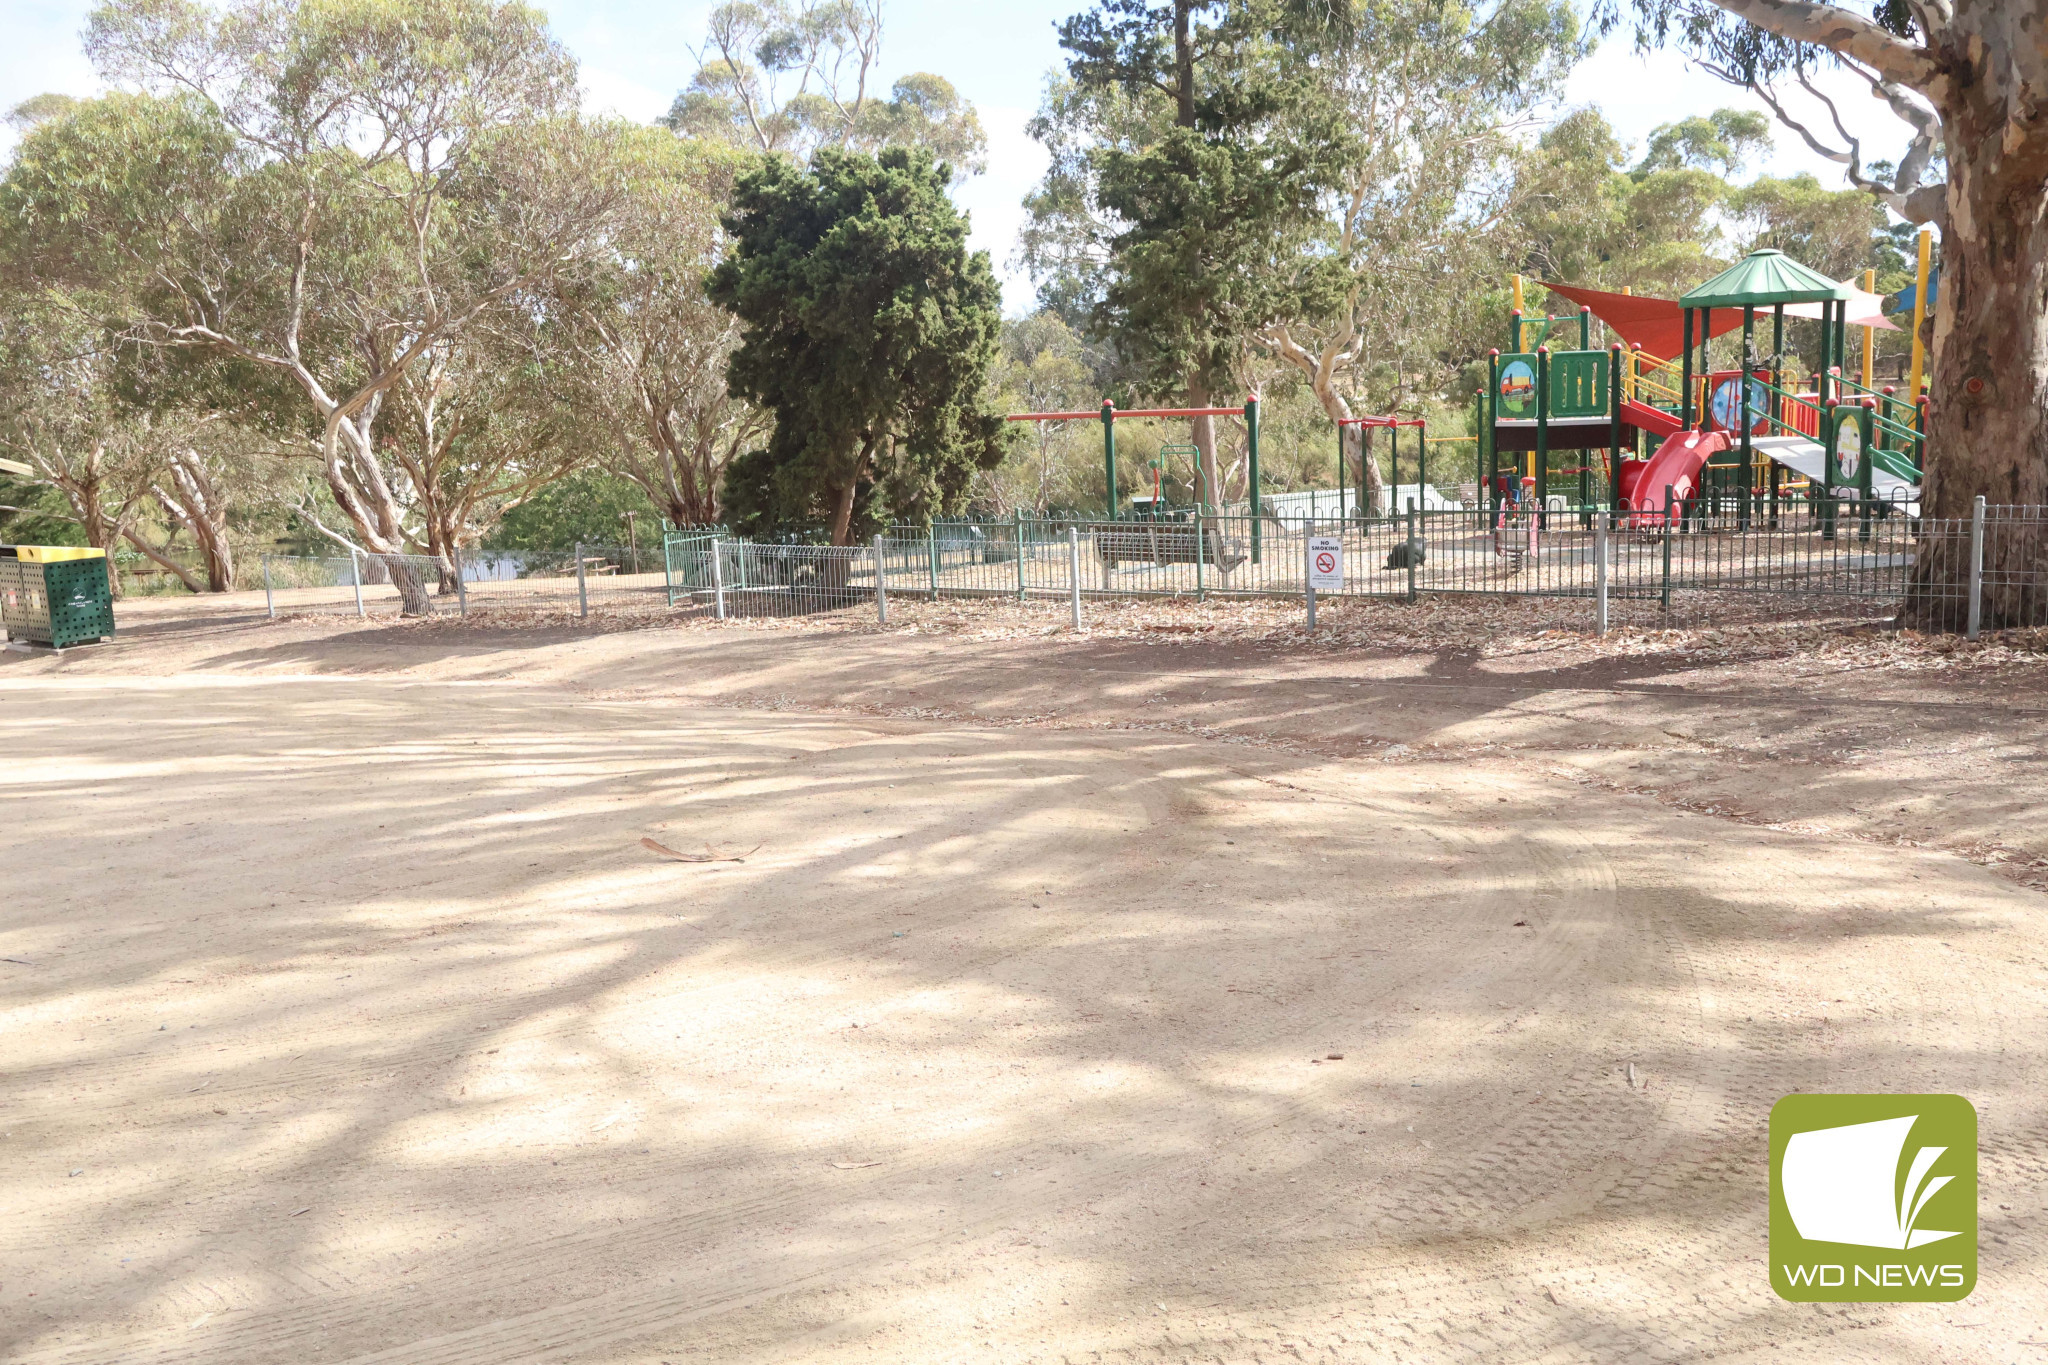 Carpark endorsed: Skipton’s Jubilee Park carpark has been endorsed by Corangamite Shire Council for funding under the Local Roads and Community Infrastructure Program.